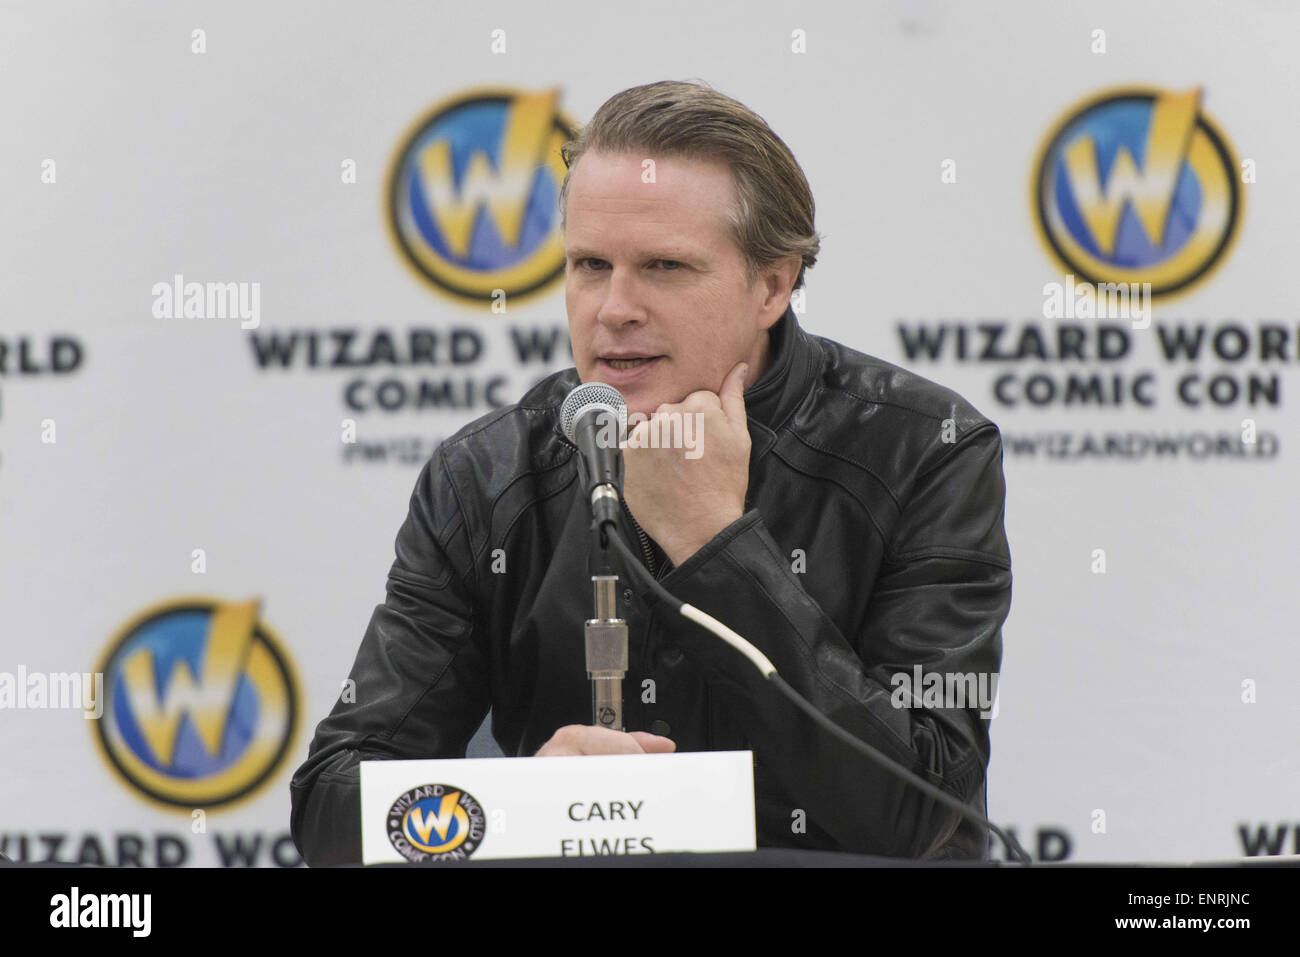 Philadelphia, Pennsylvania, USA. 10th May, 2015. English actor, screenwriter, producer and best-selling author, CARY ELWES, known for his roles in The Princess Bride, Robin Hood: Men in Tights, Days of Thunder, Bram Stoker's Dracula, Hot Shots!, during a presser at Wizard World Comic Con convention. © Ricky Fitchett/ZUMA Wire/Alamy Live News Stock Photo